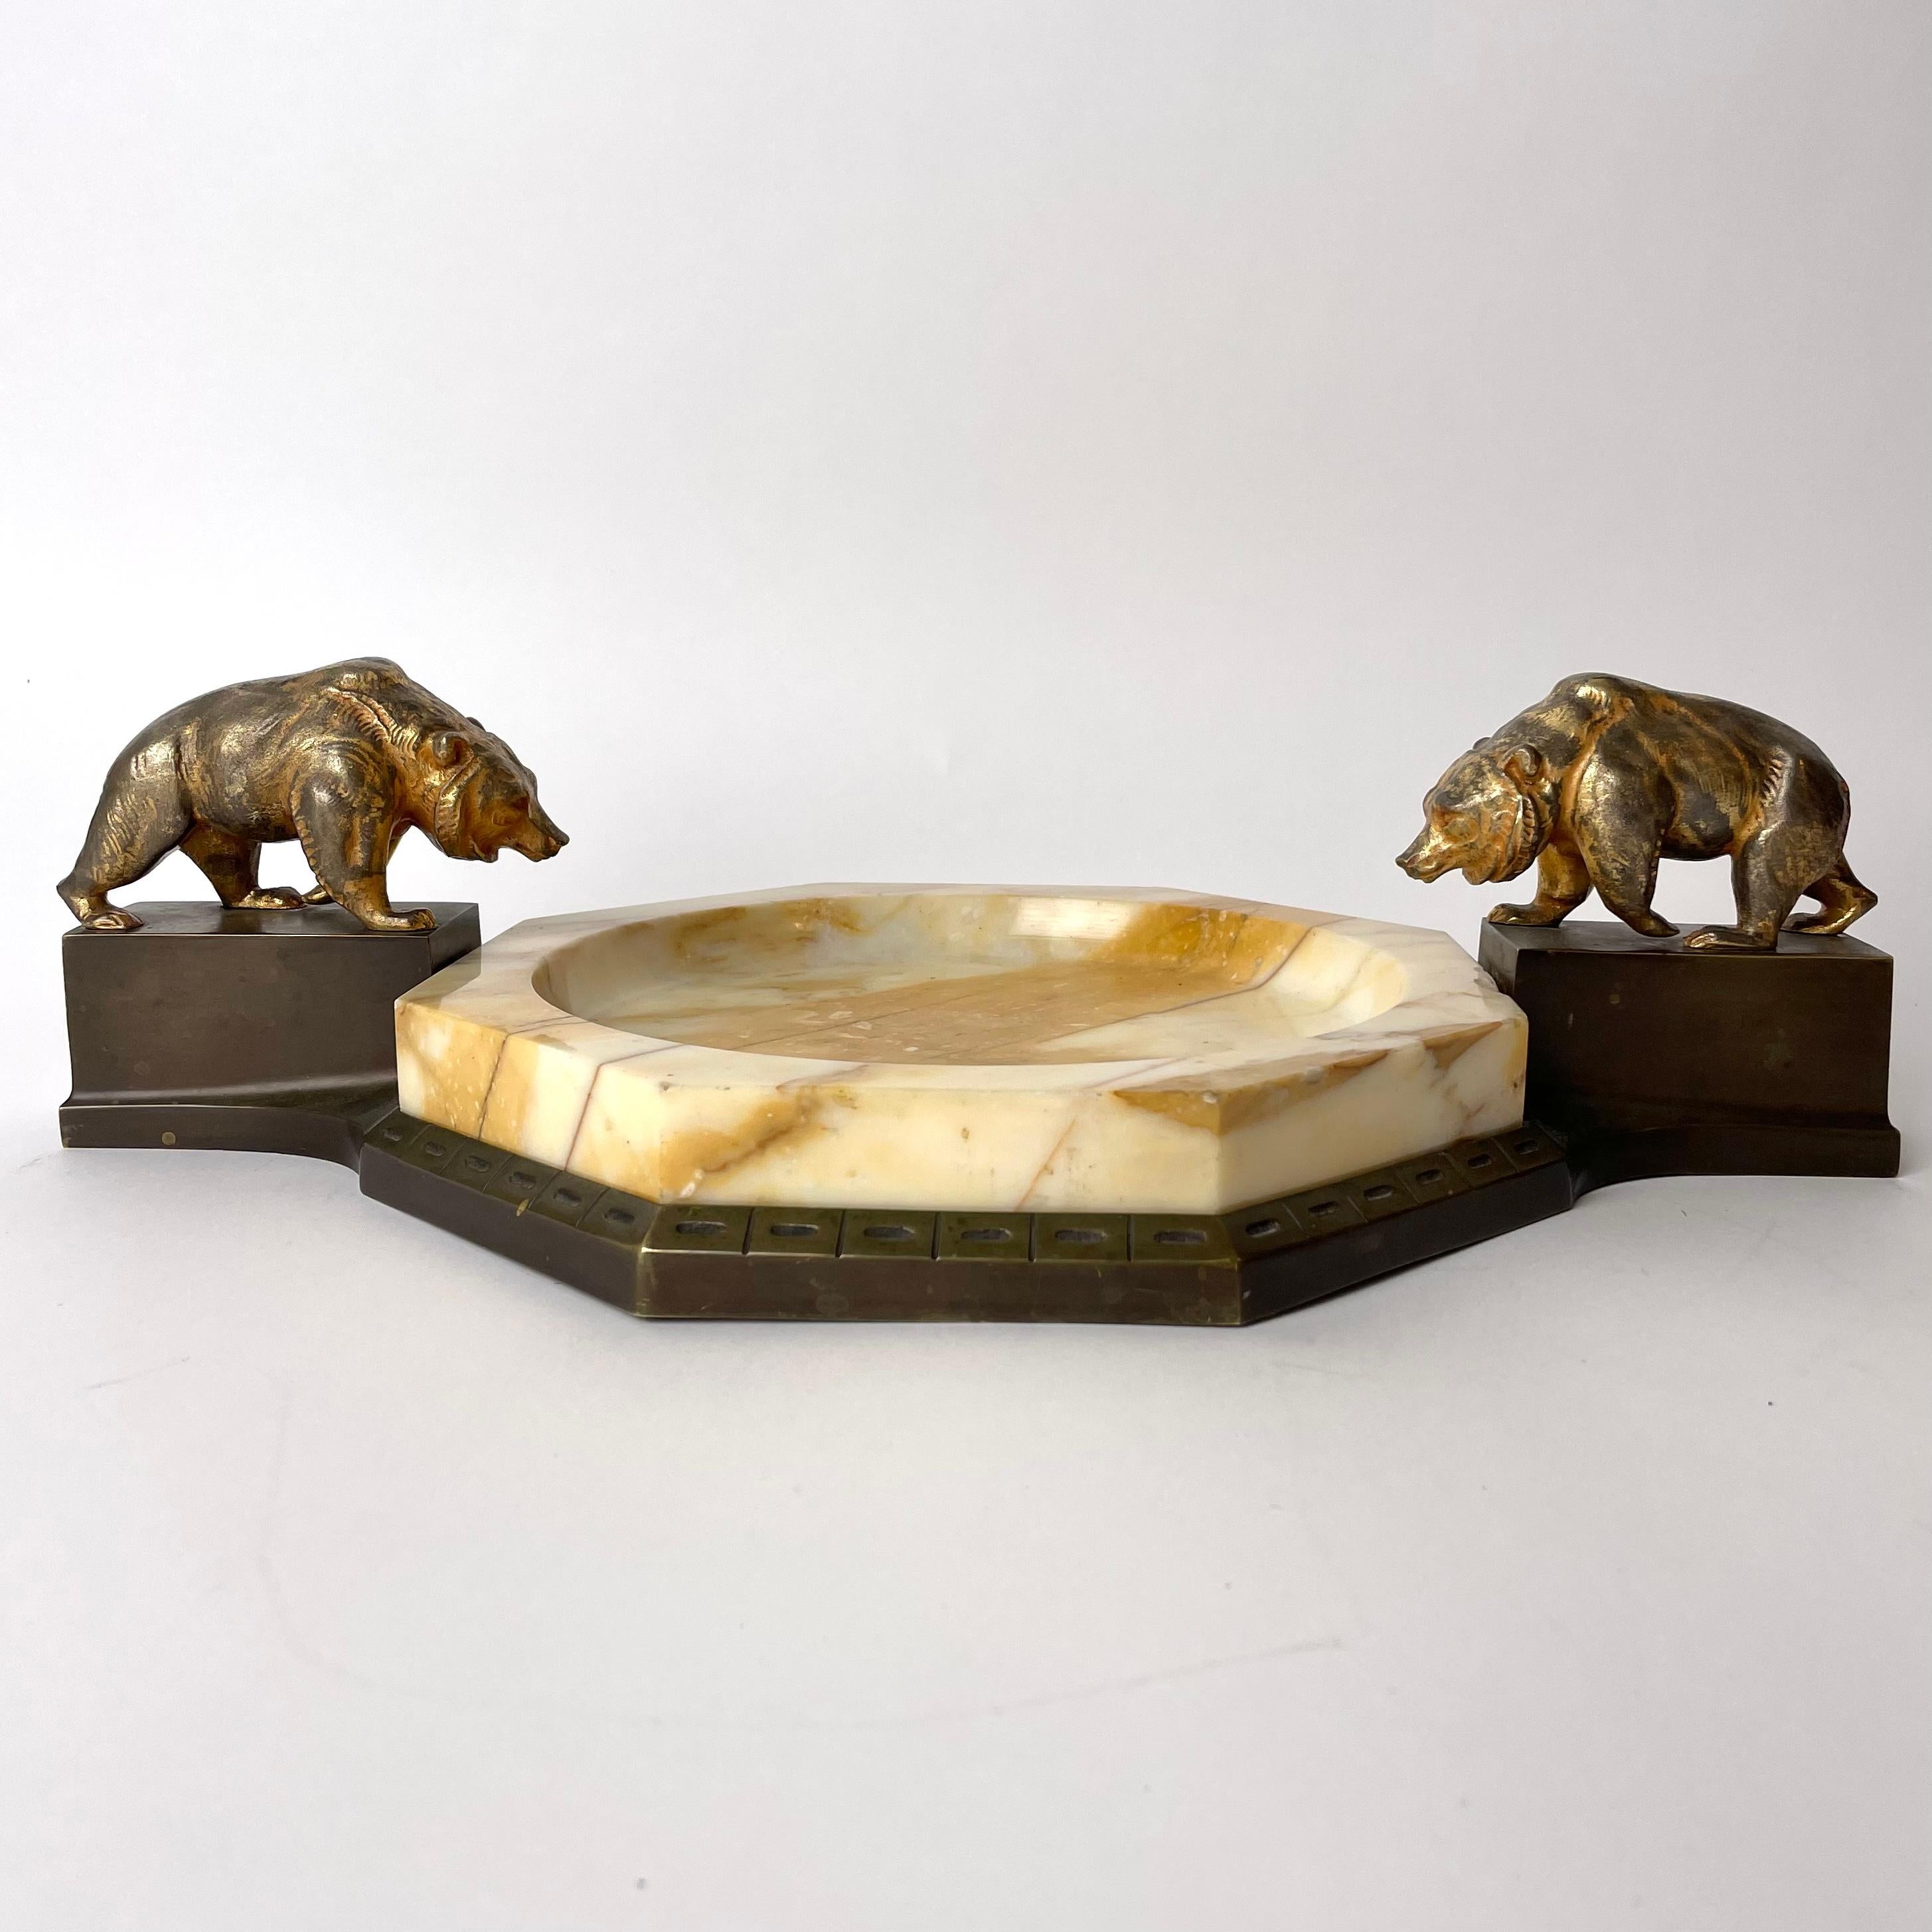 A cool dish in marble and bronze. Beautiful decorated with gilded bears. Art Deco from the 1920s. Worn gilding on the bears.

Wear consistent with age and use.